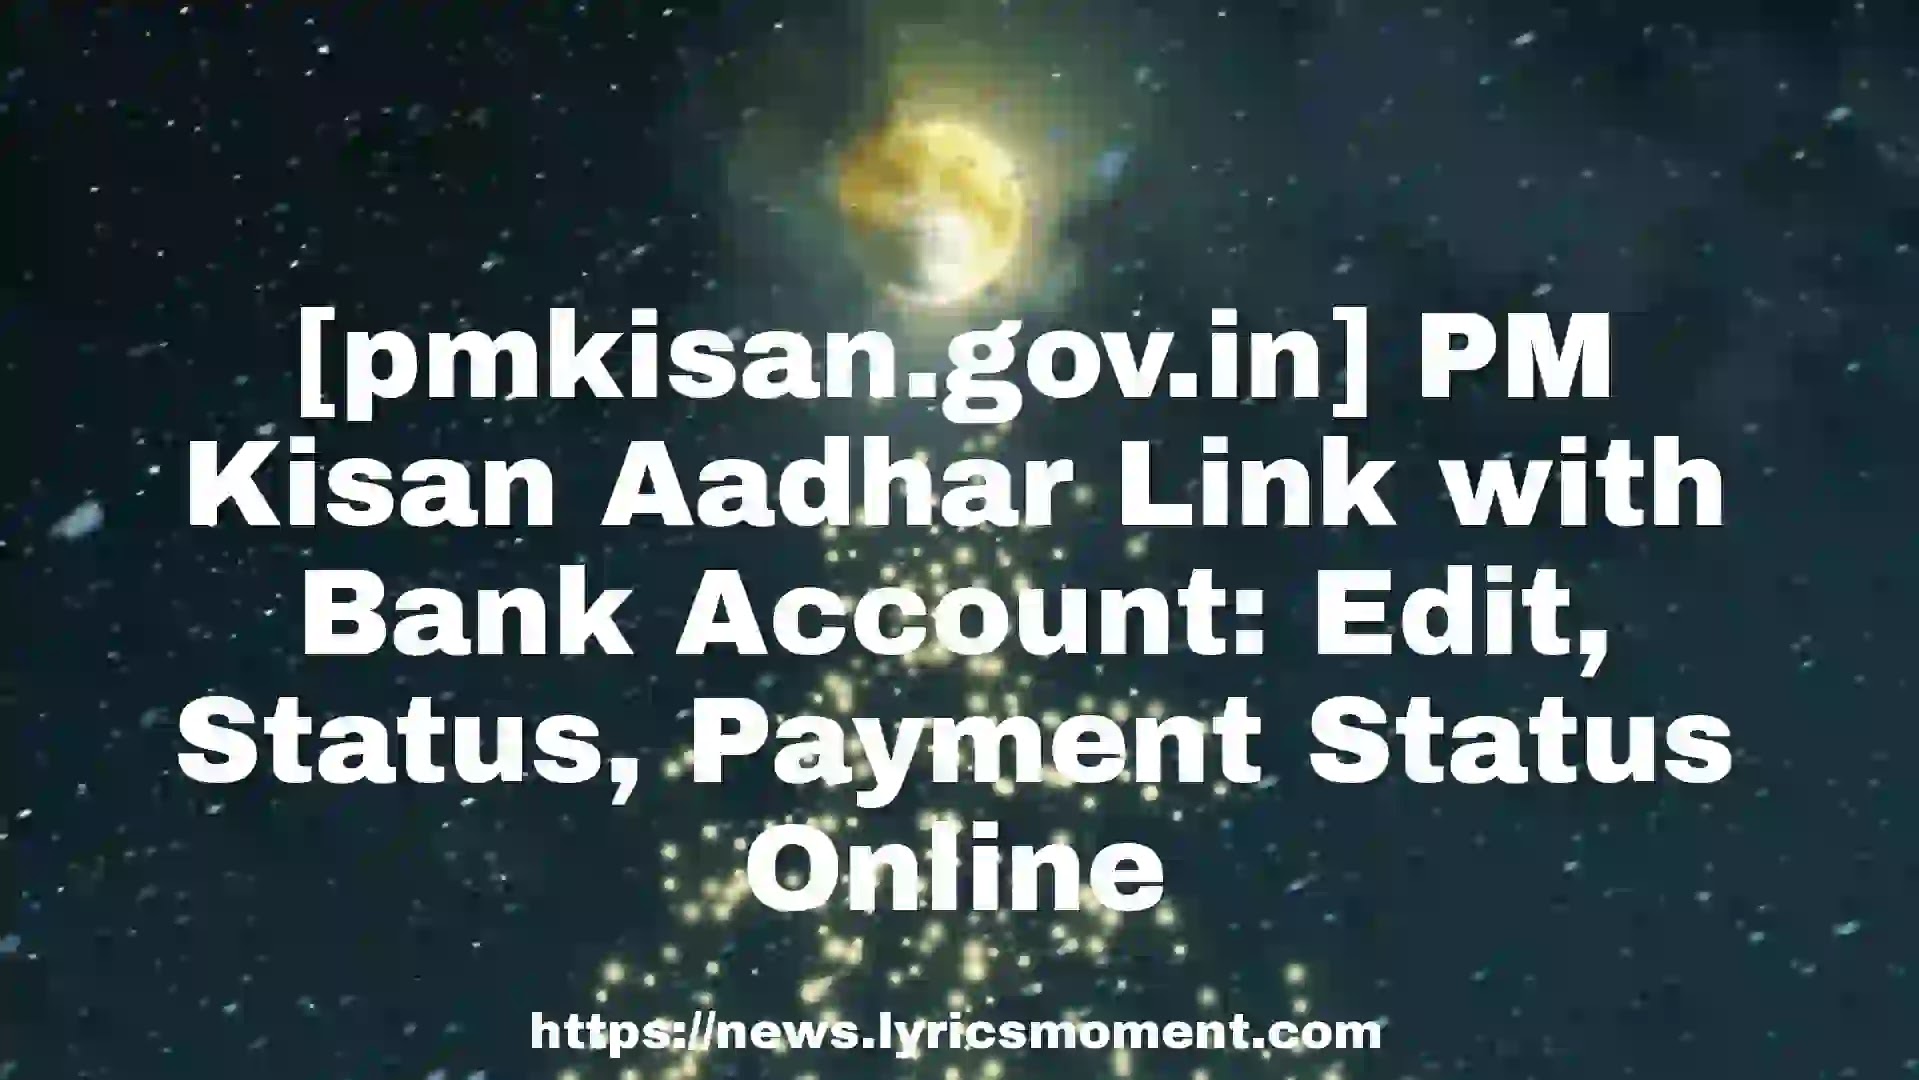 [pmkisan.gov.in] PM Kisan Aadhar Link with Bank Account: Edit, Status, Payment Status Online